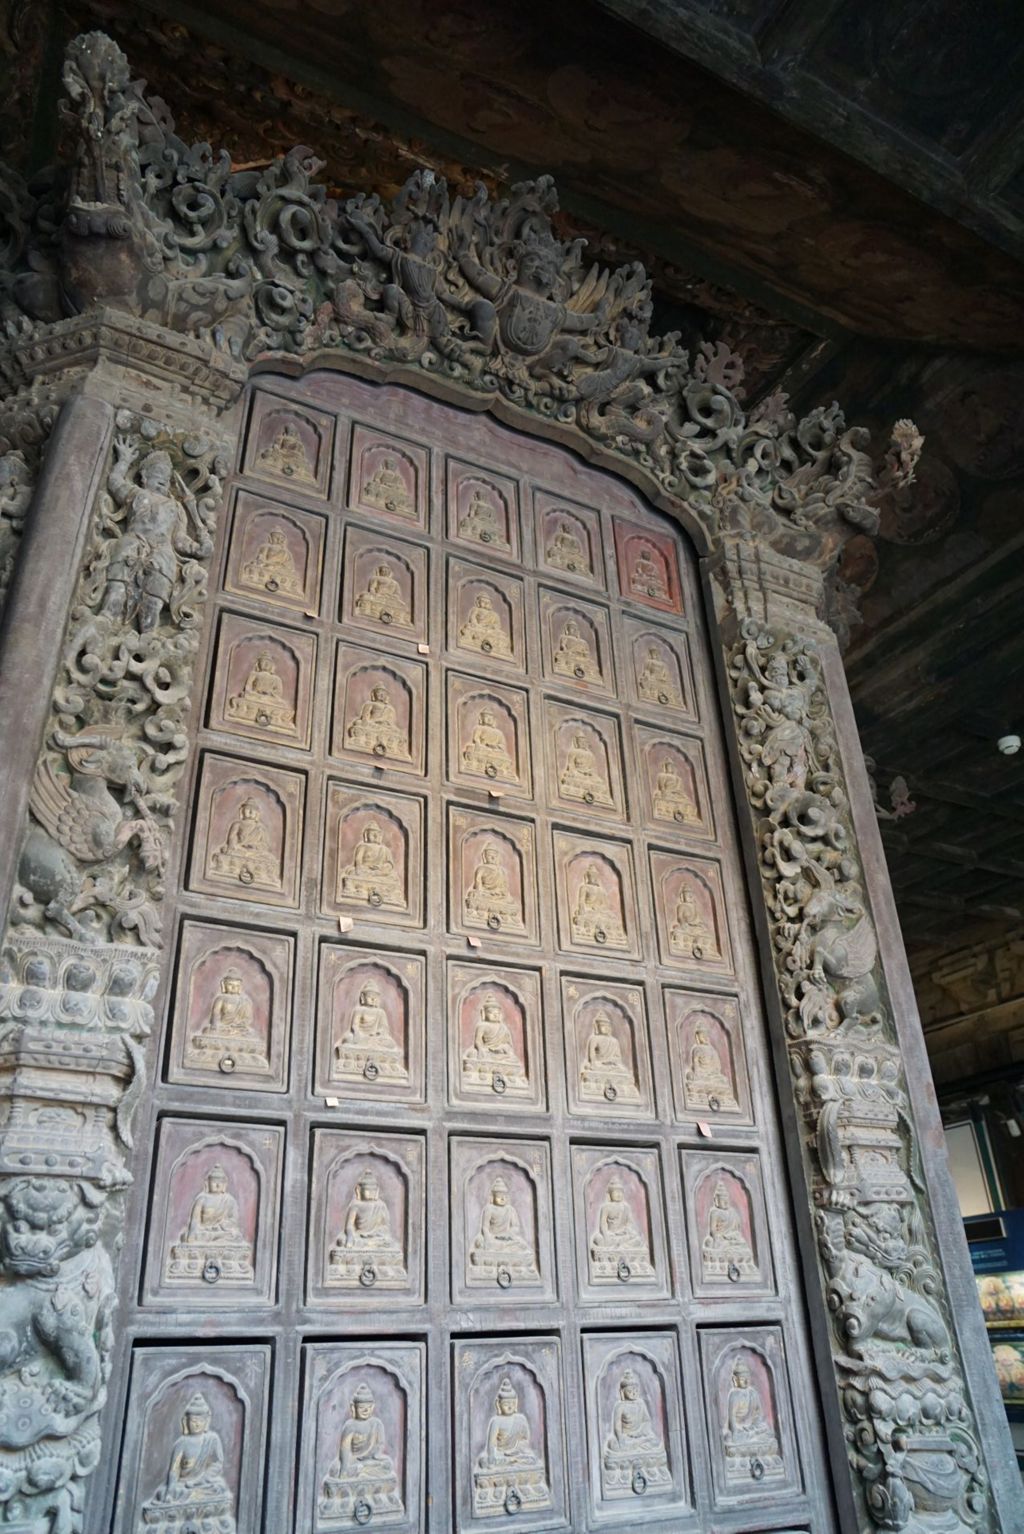 Miniature of Revolving Sutra Cabinet (Zhuanlun Jingzang, or Scripture Cabinet) in Sutra Hall (Zangdian, or Scripture Hall), front